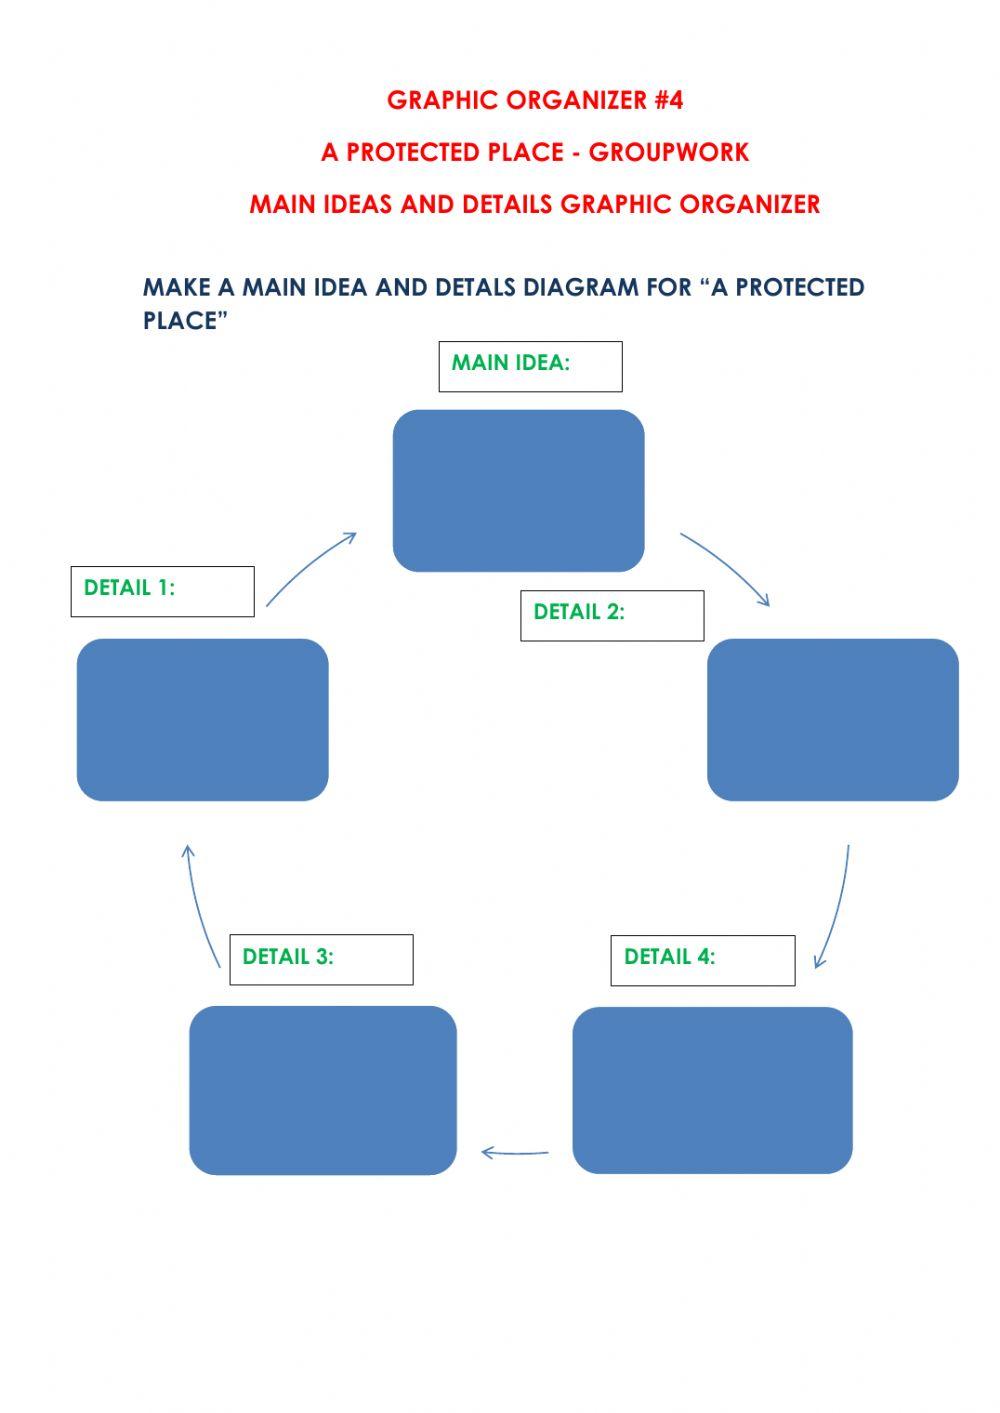 A Protected Place Graphic Organizer